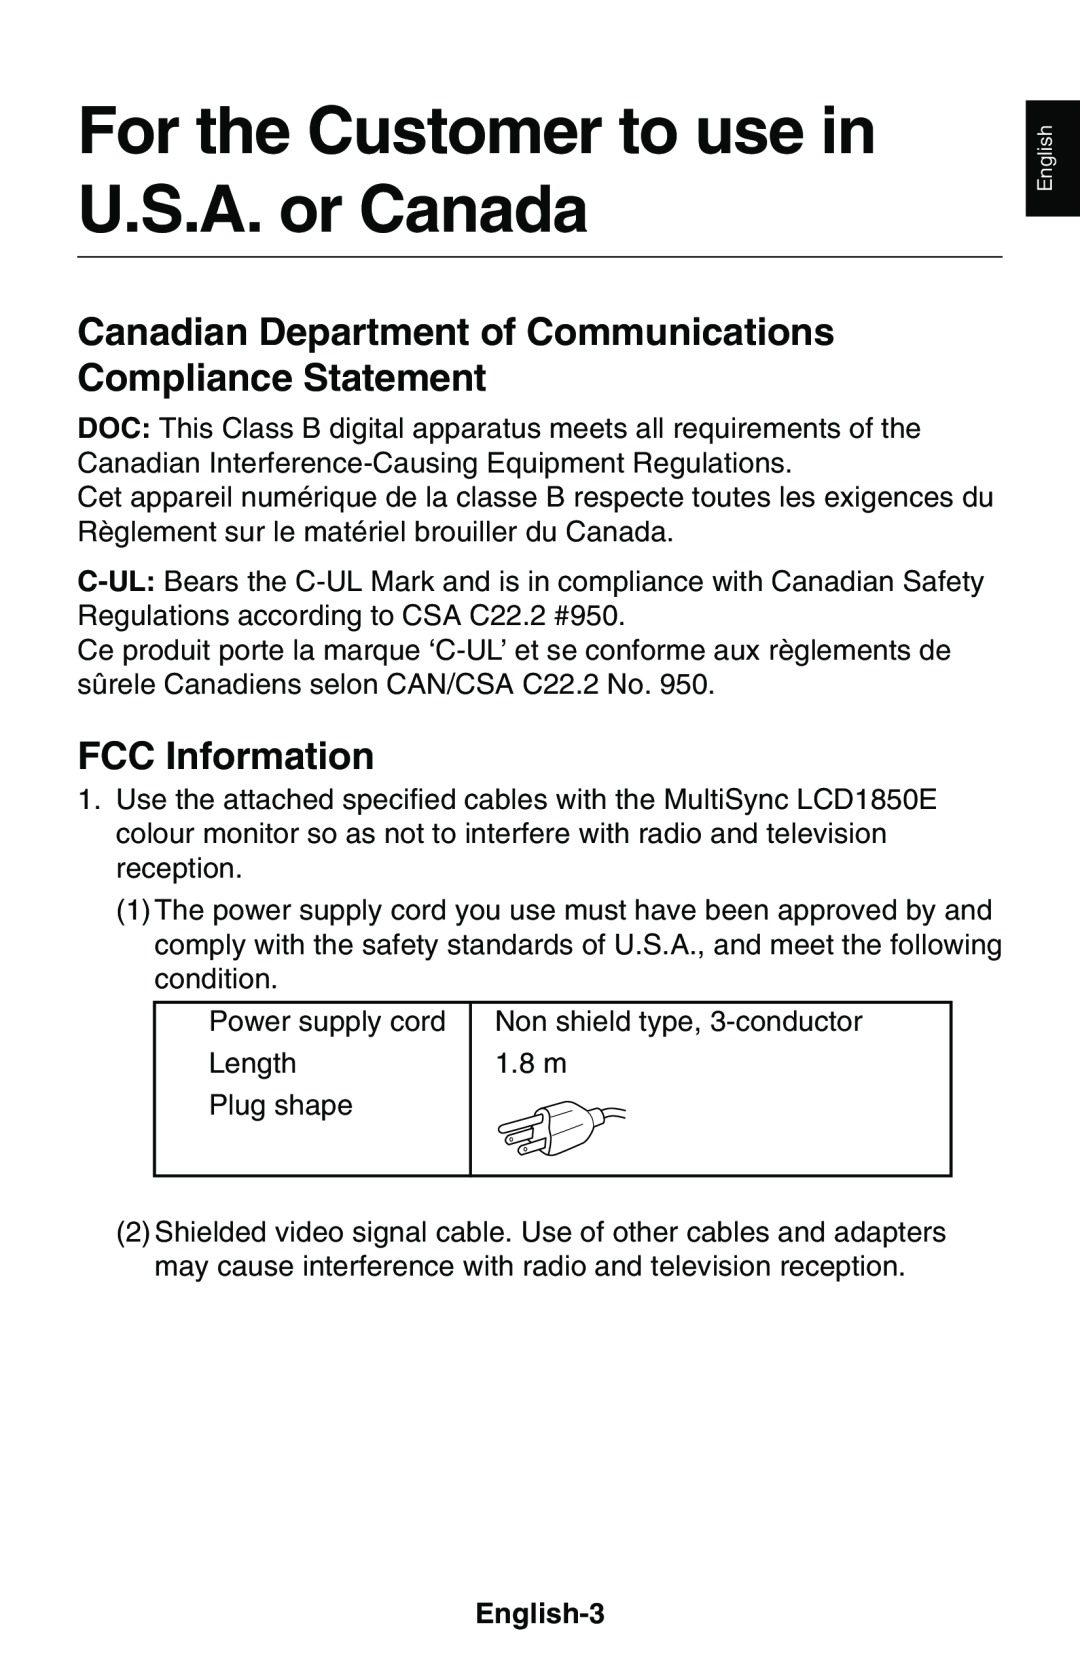 NEC LCD1850E For the Customer to use in U.S.A. or Canada, Canadian Department of Communications Compliance Statement 